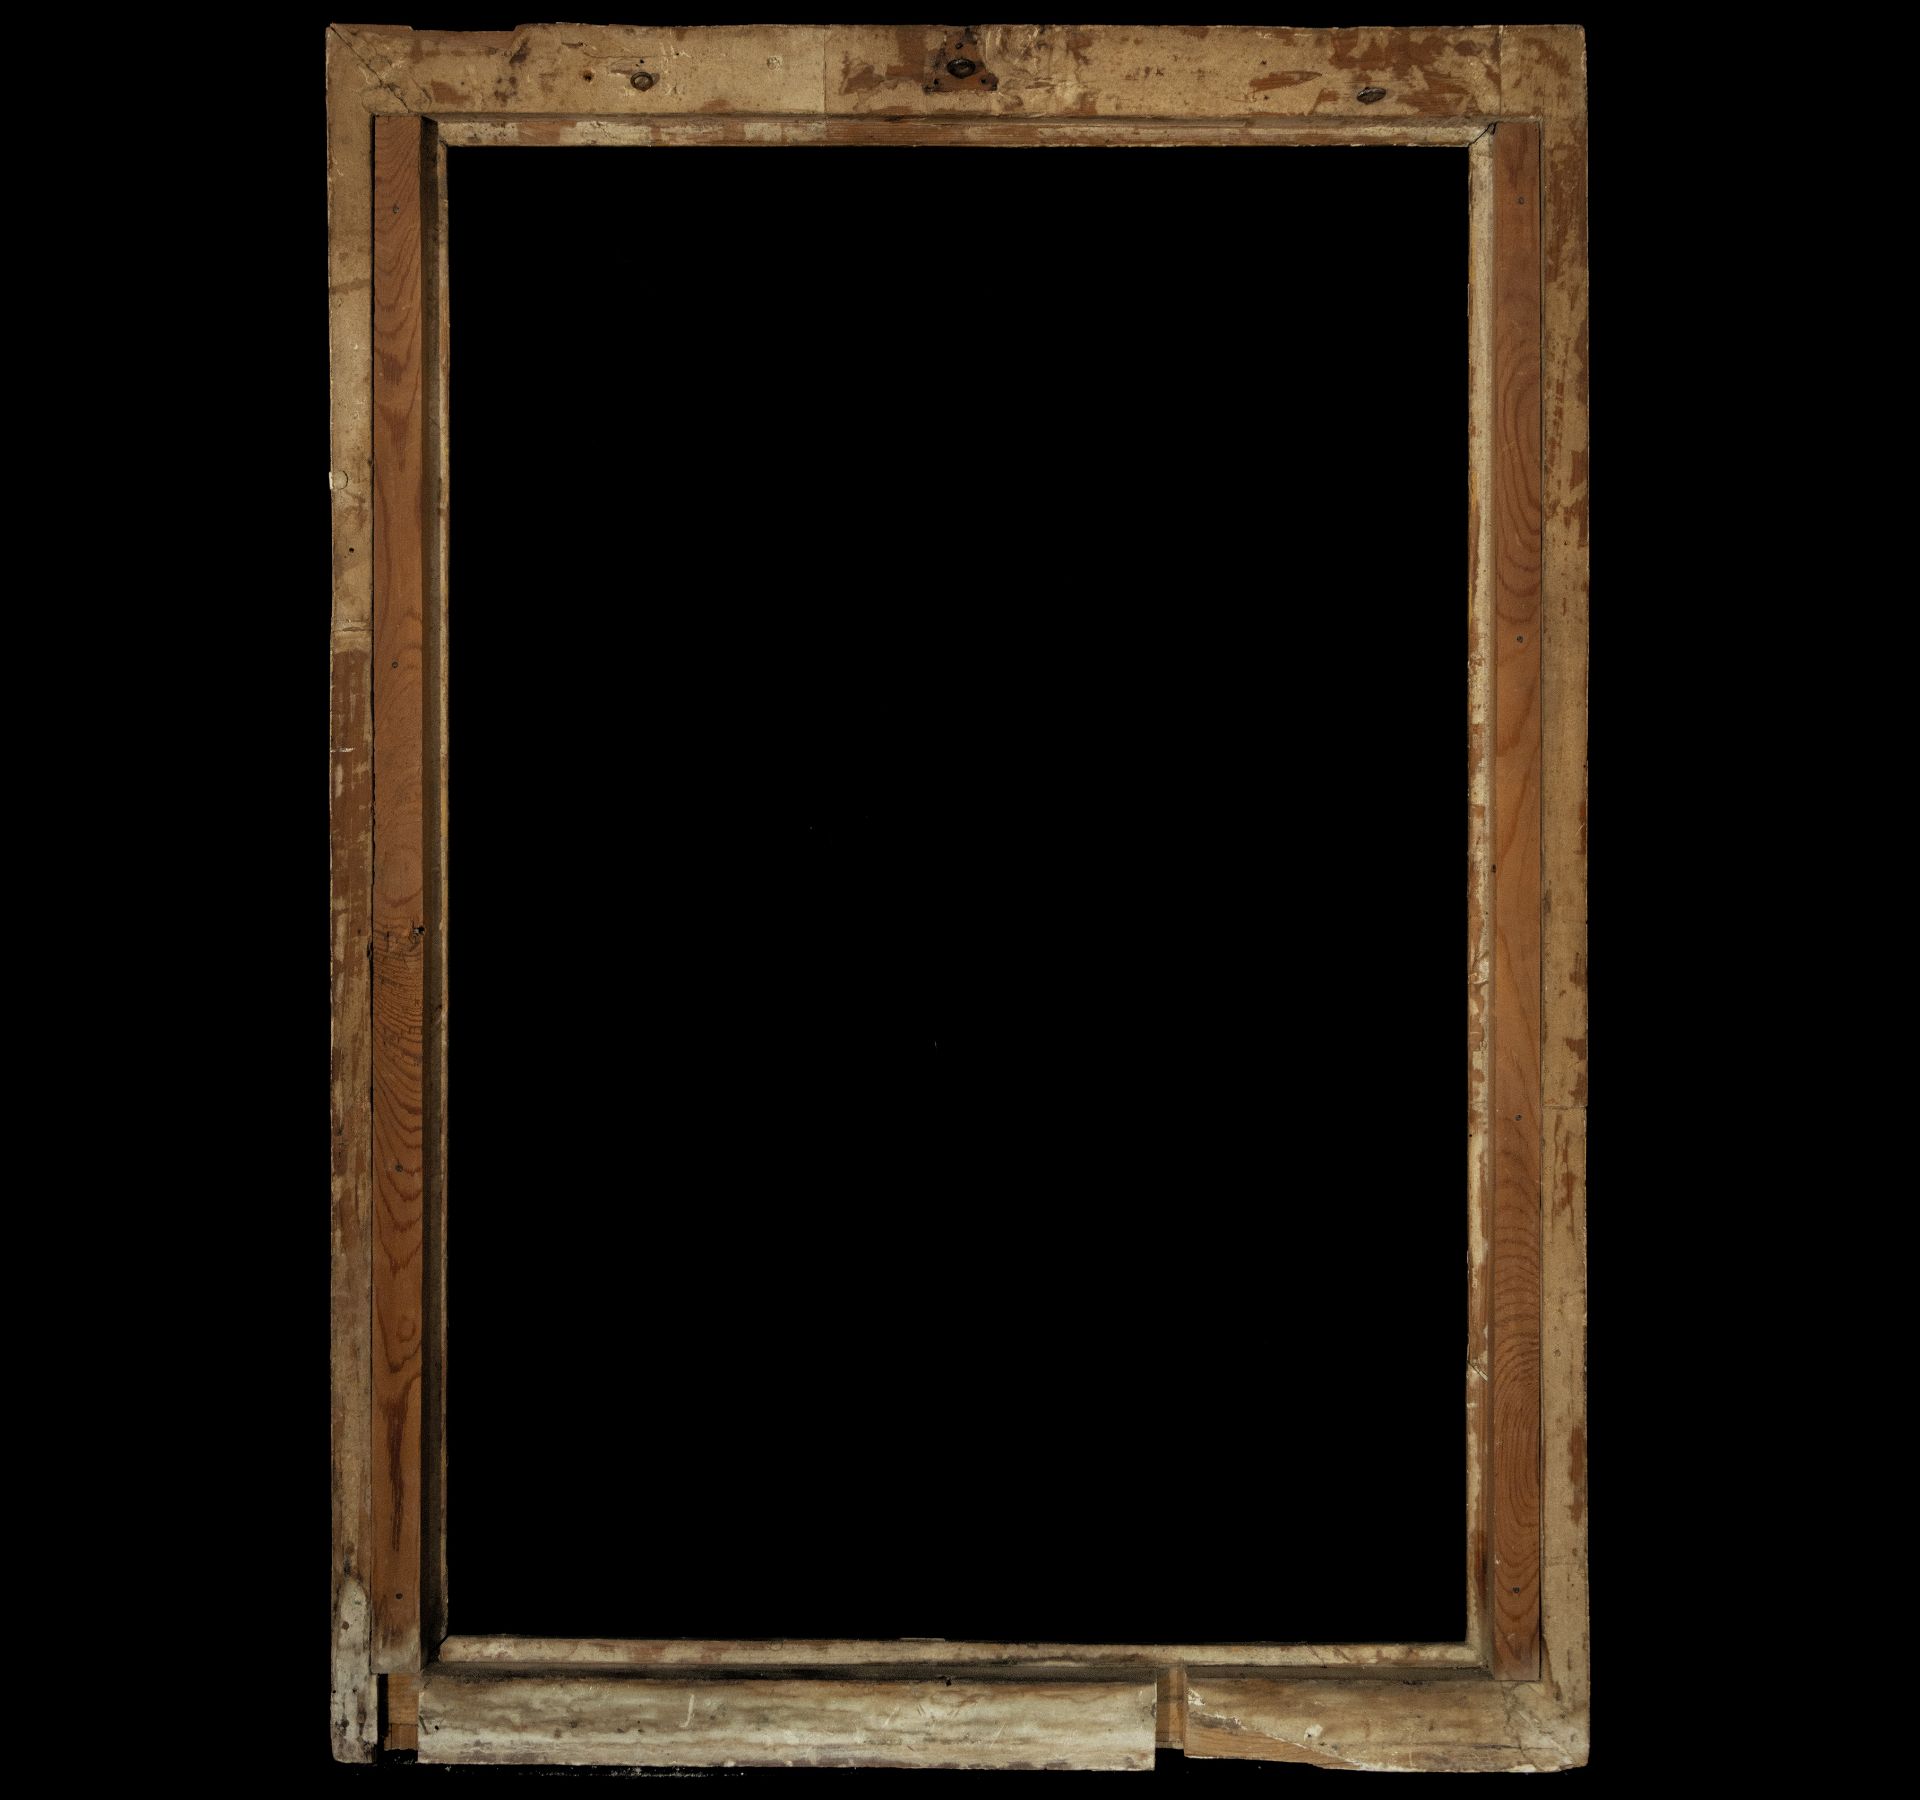 Antique 18th century Italian frame in gilt wood - Image 2 of 2